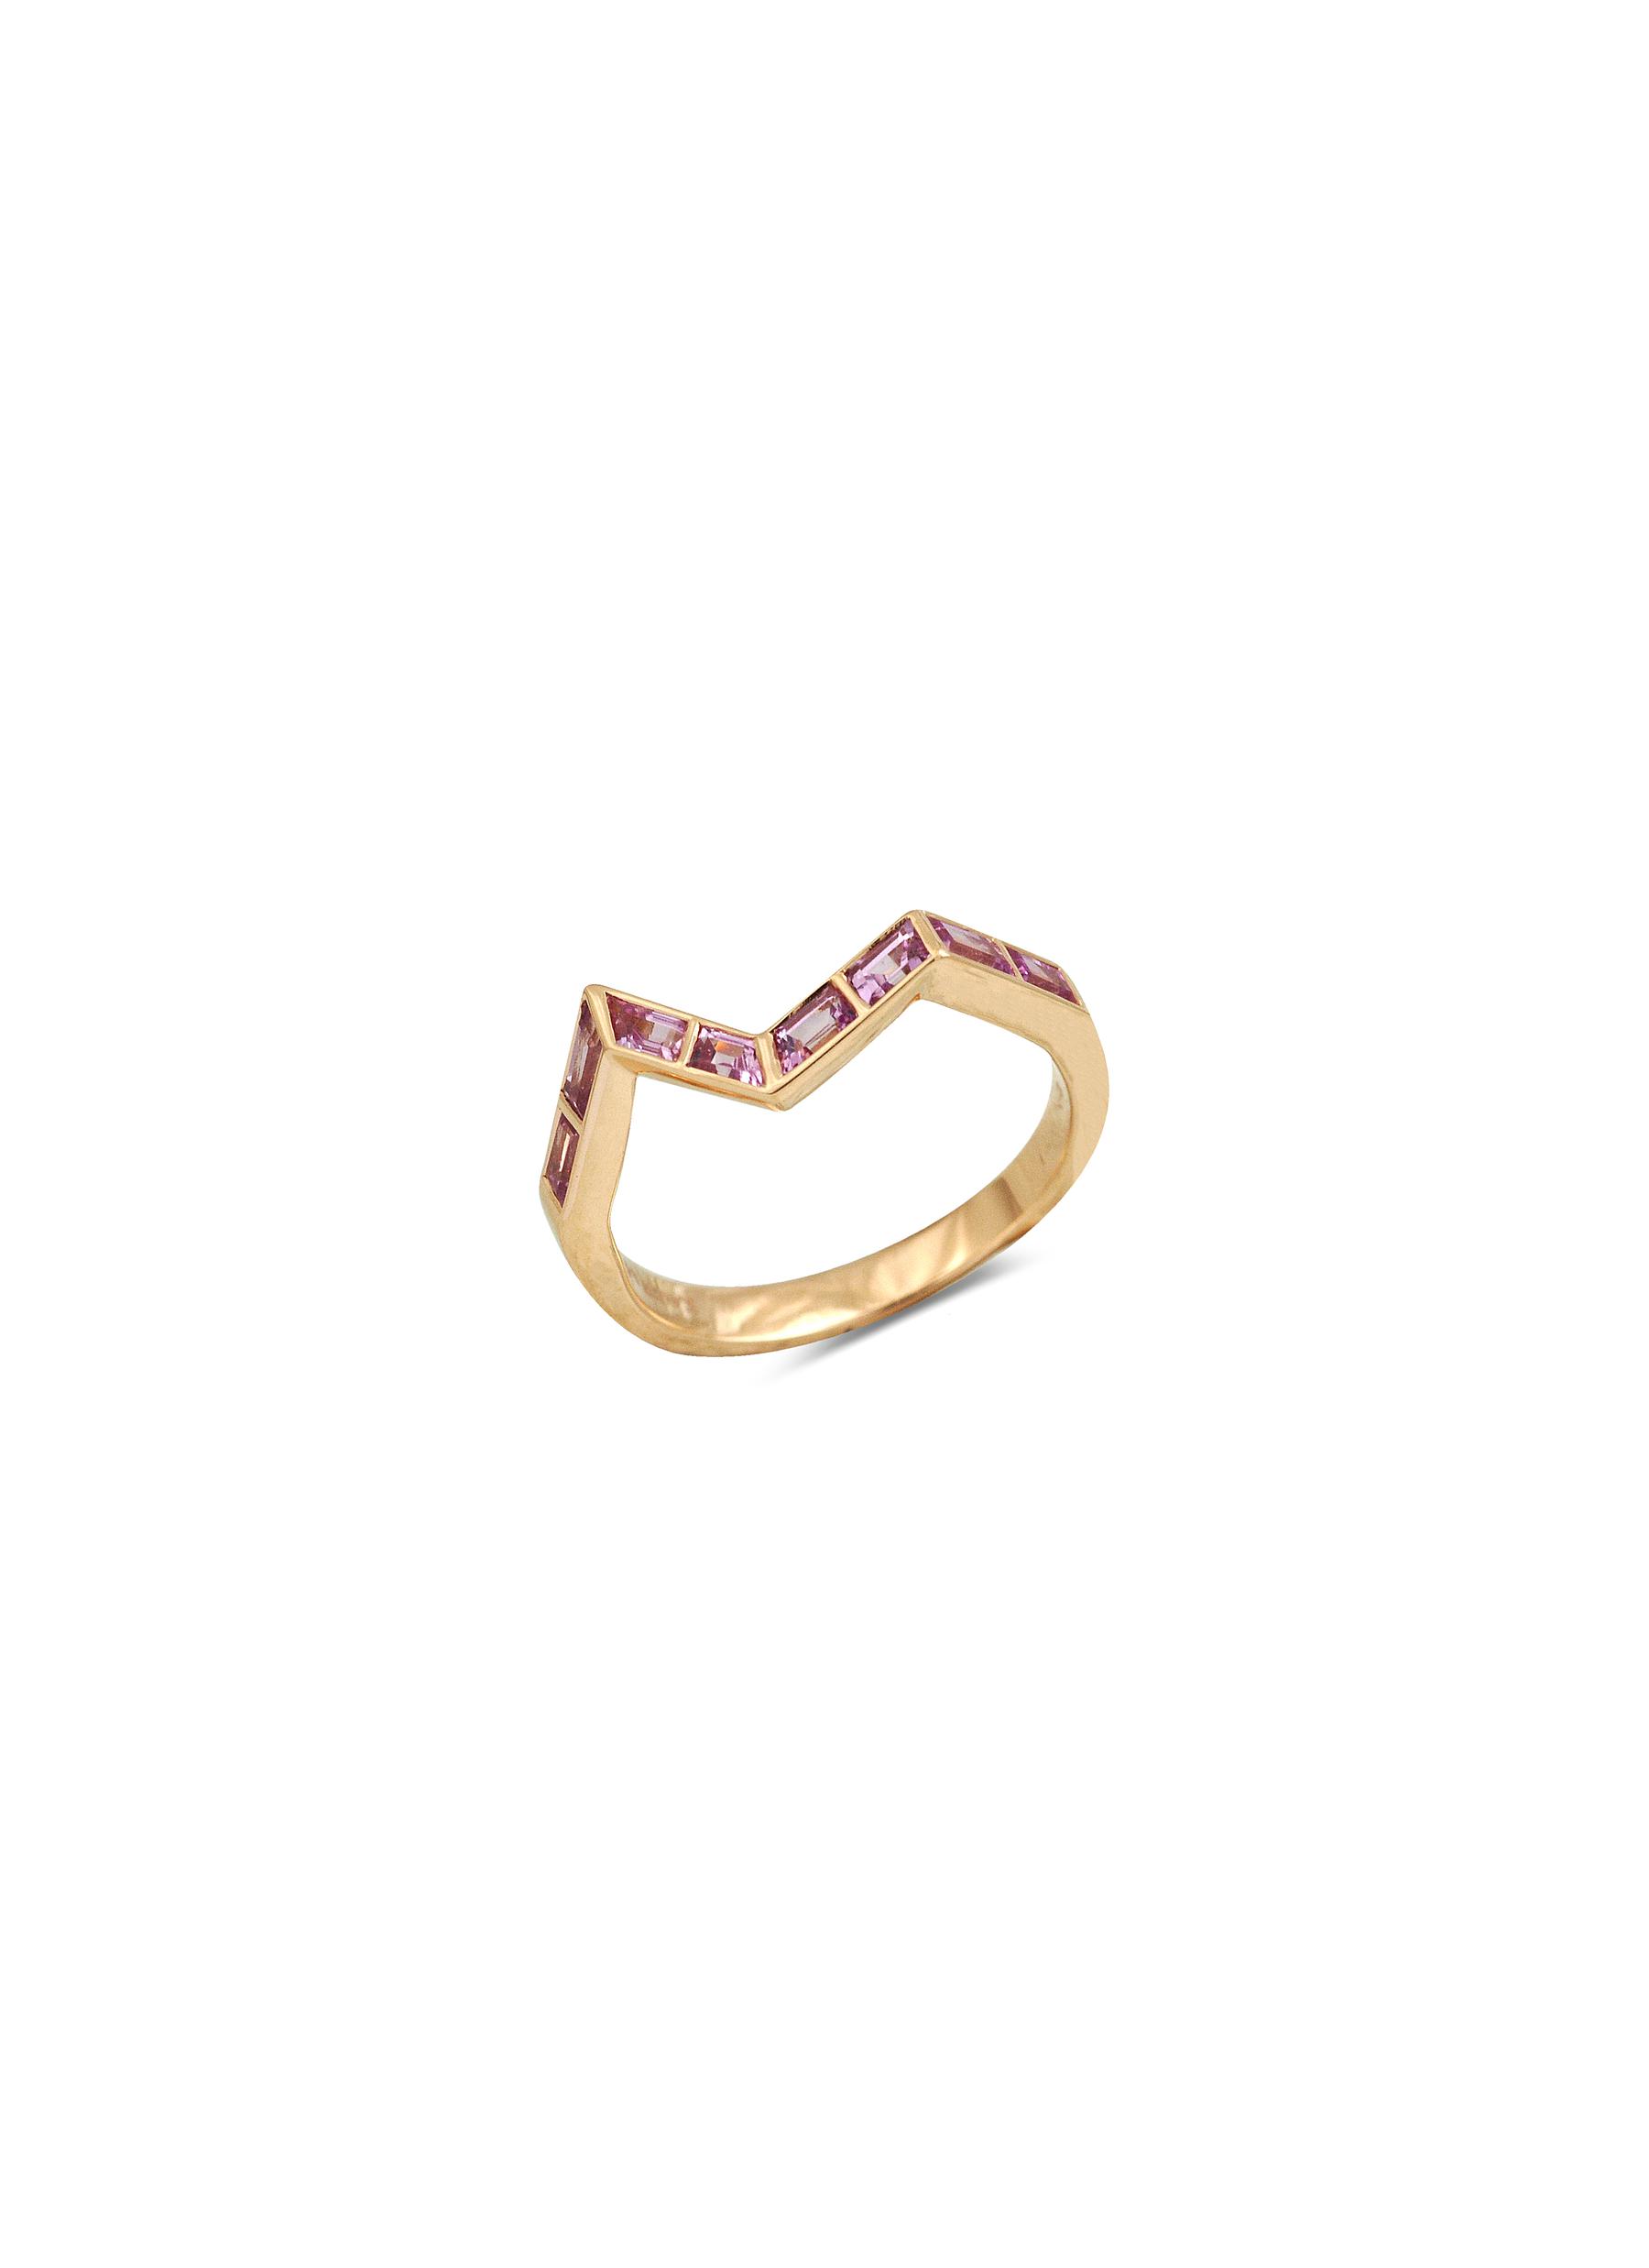 ‘Origami Ziggy' Pink Sapphire 18K Rose Gold Step Ring